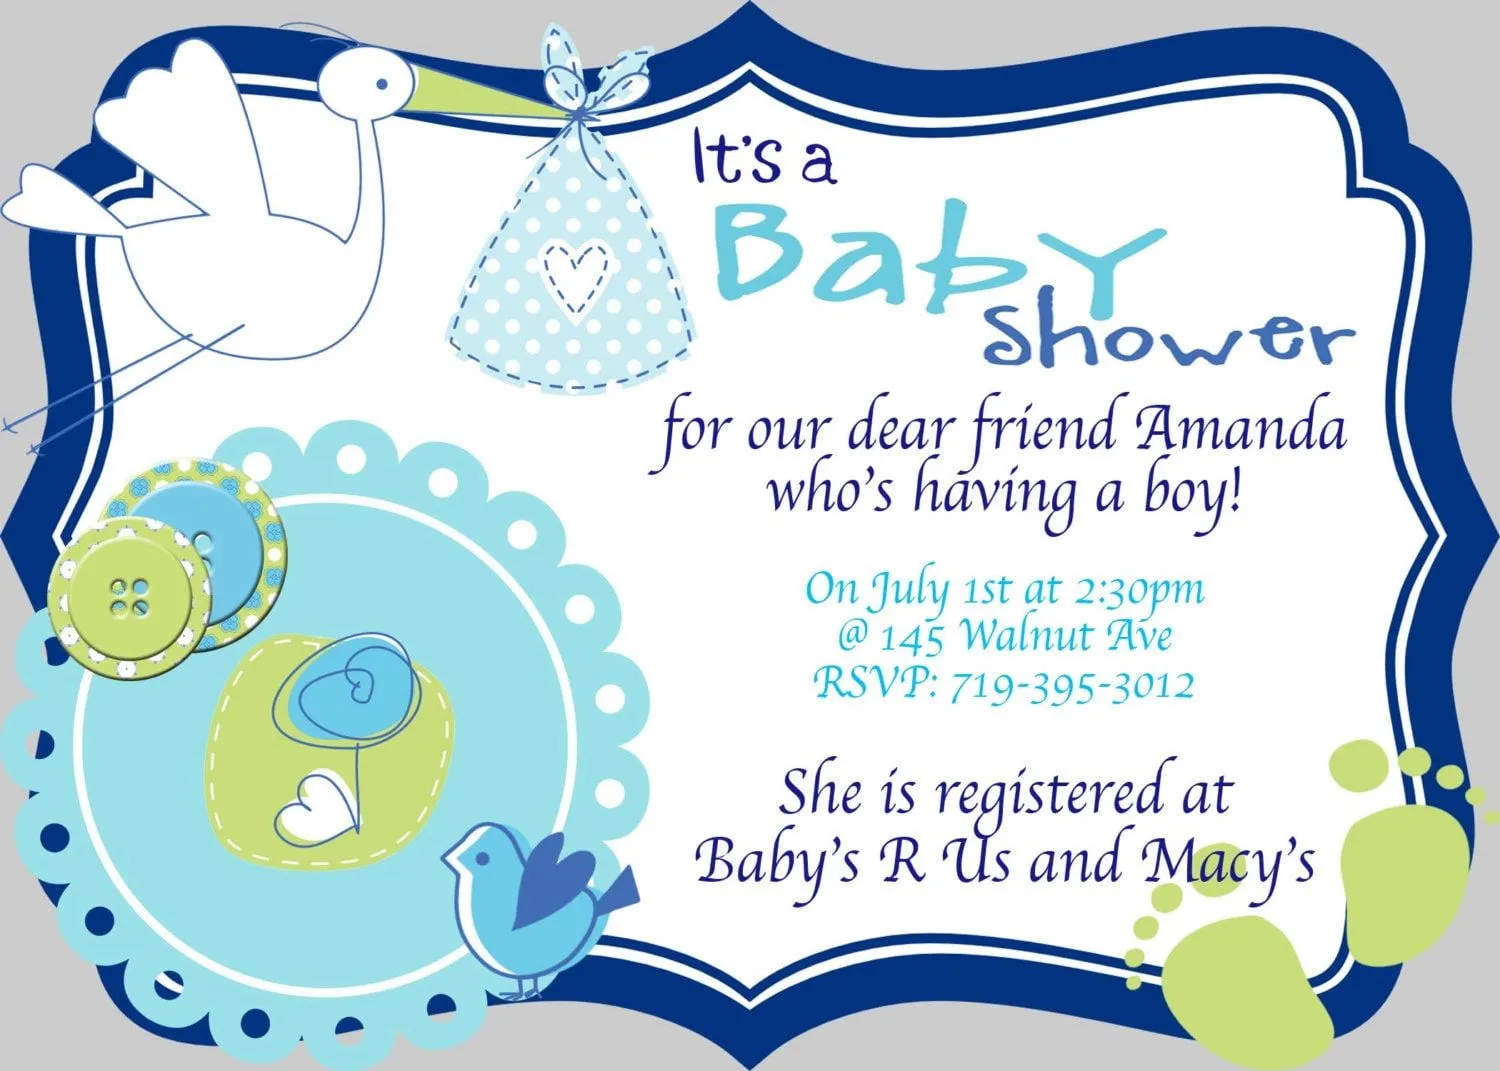 storks for baby showers - Baby Showers